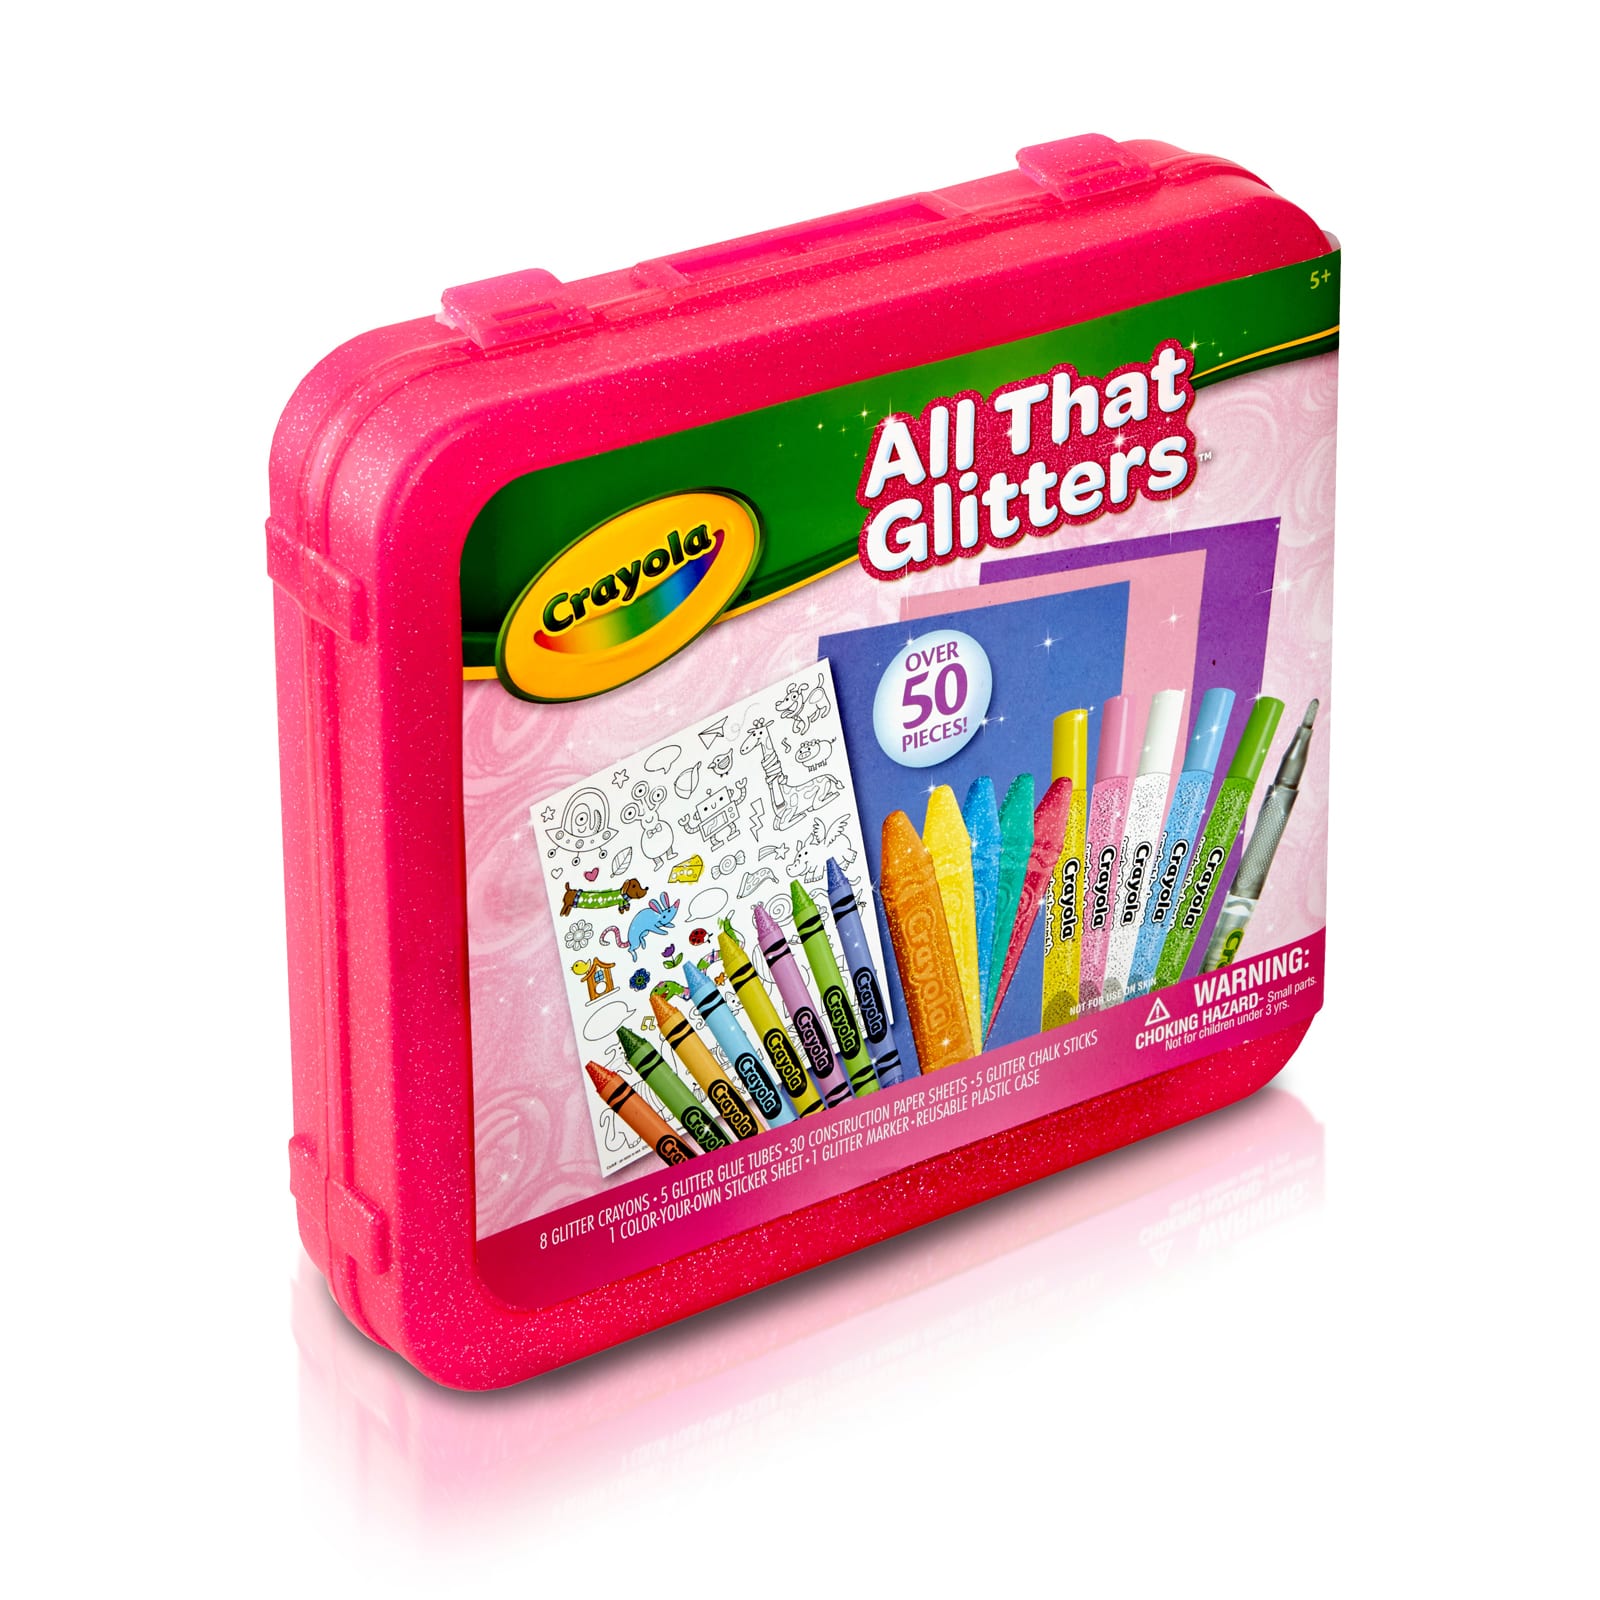 Keep the kids entertained with this Crayola Glitter Art Kit at under $10